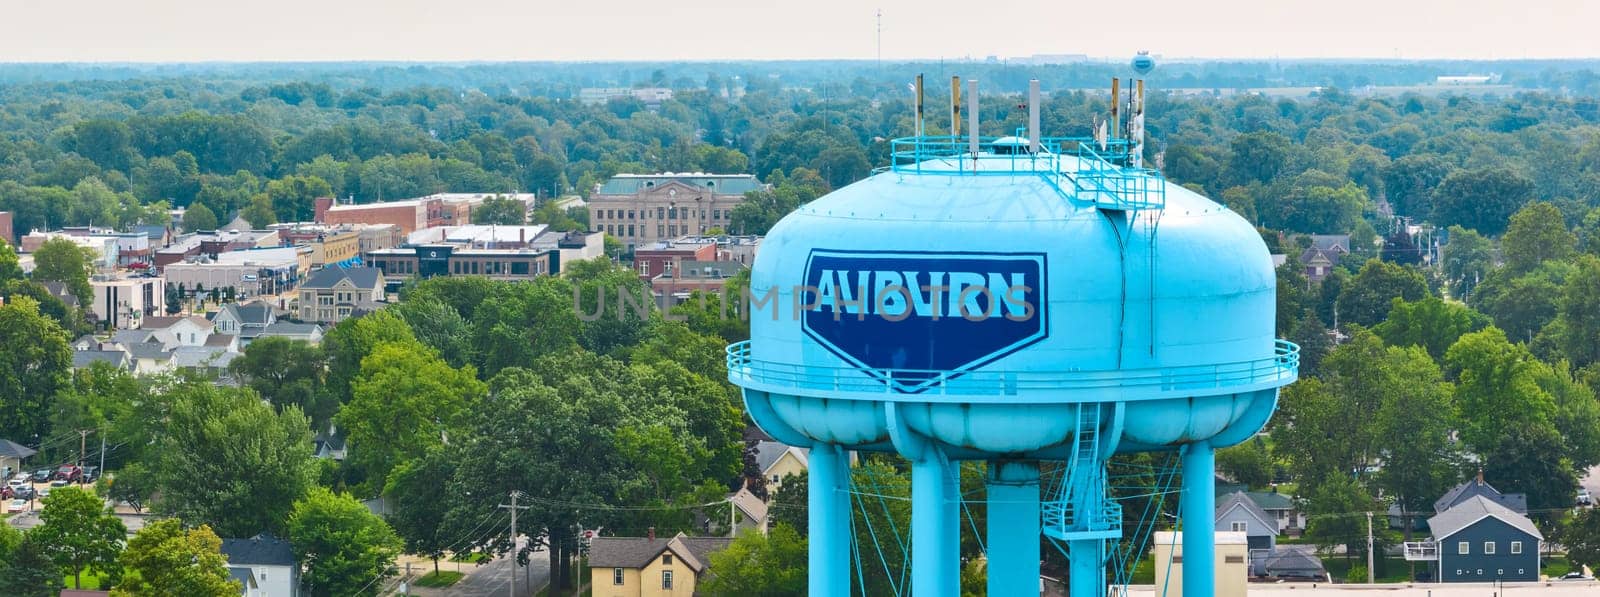 Image of Wide panoramic view of Auburn downtown with focus on bright blue water tower aerial